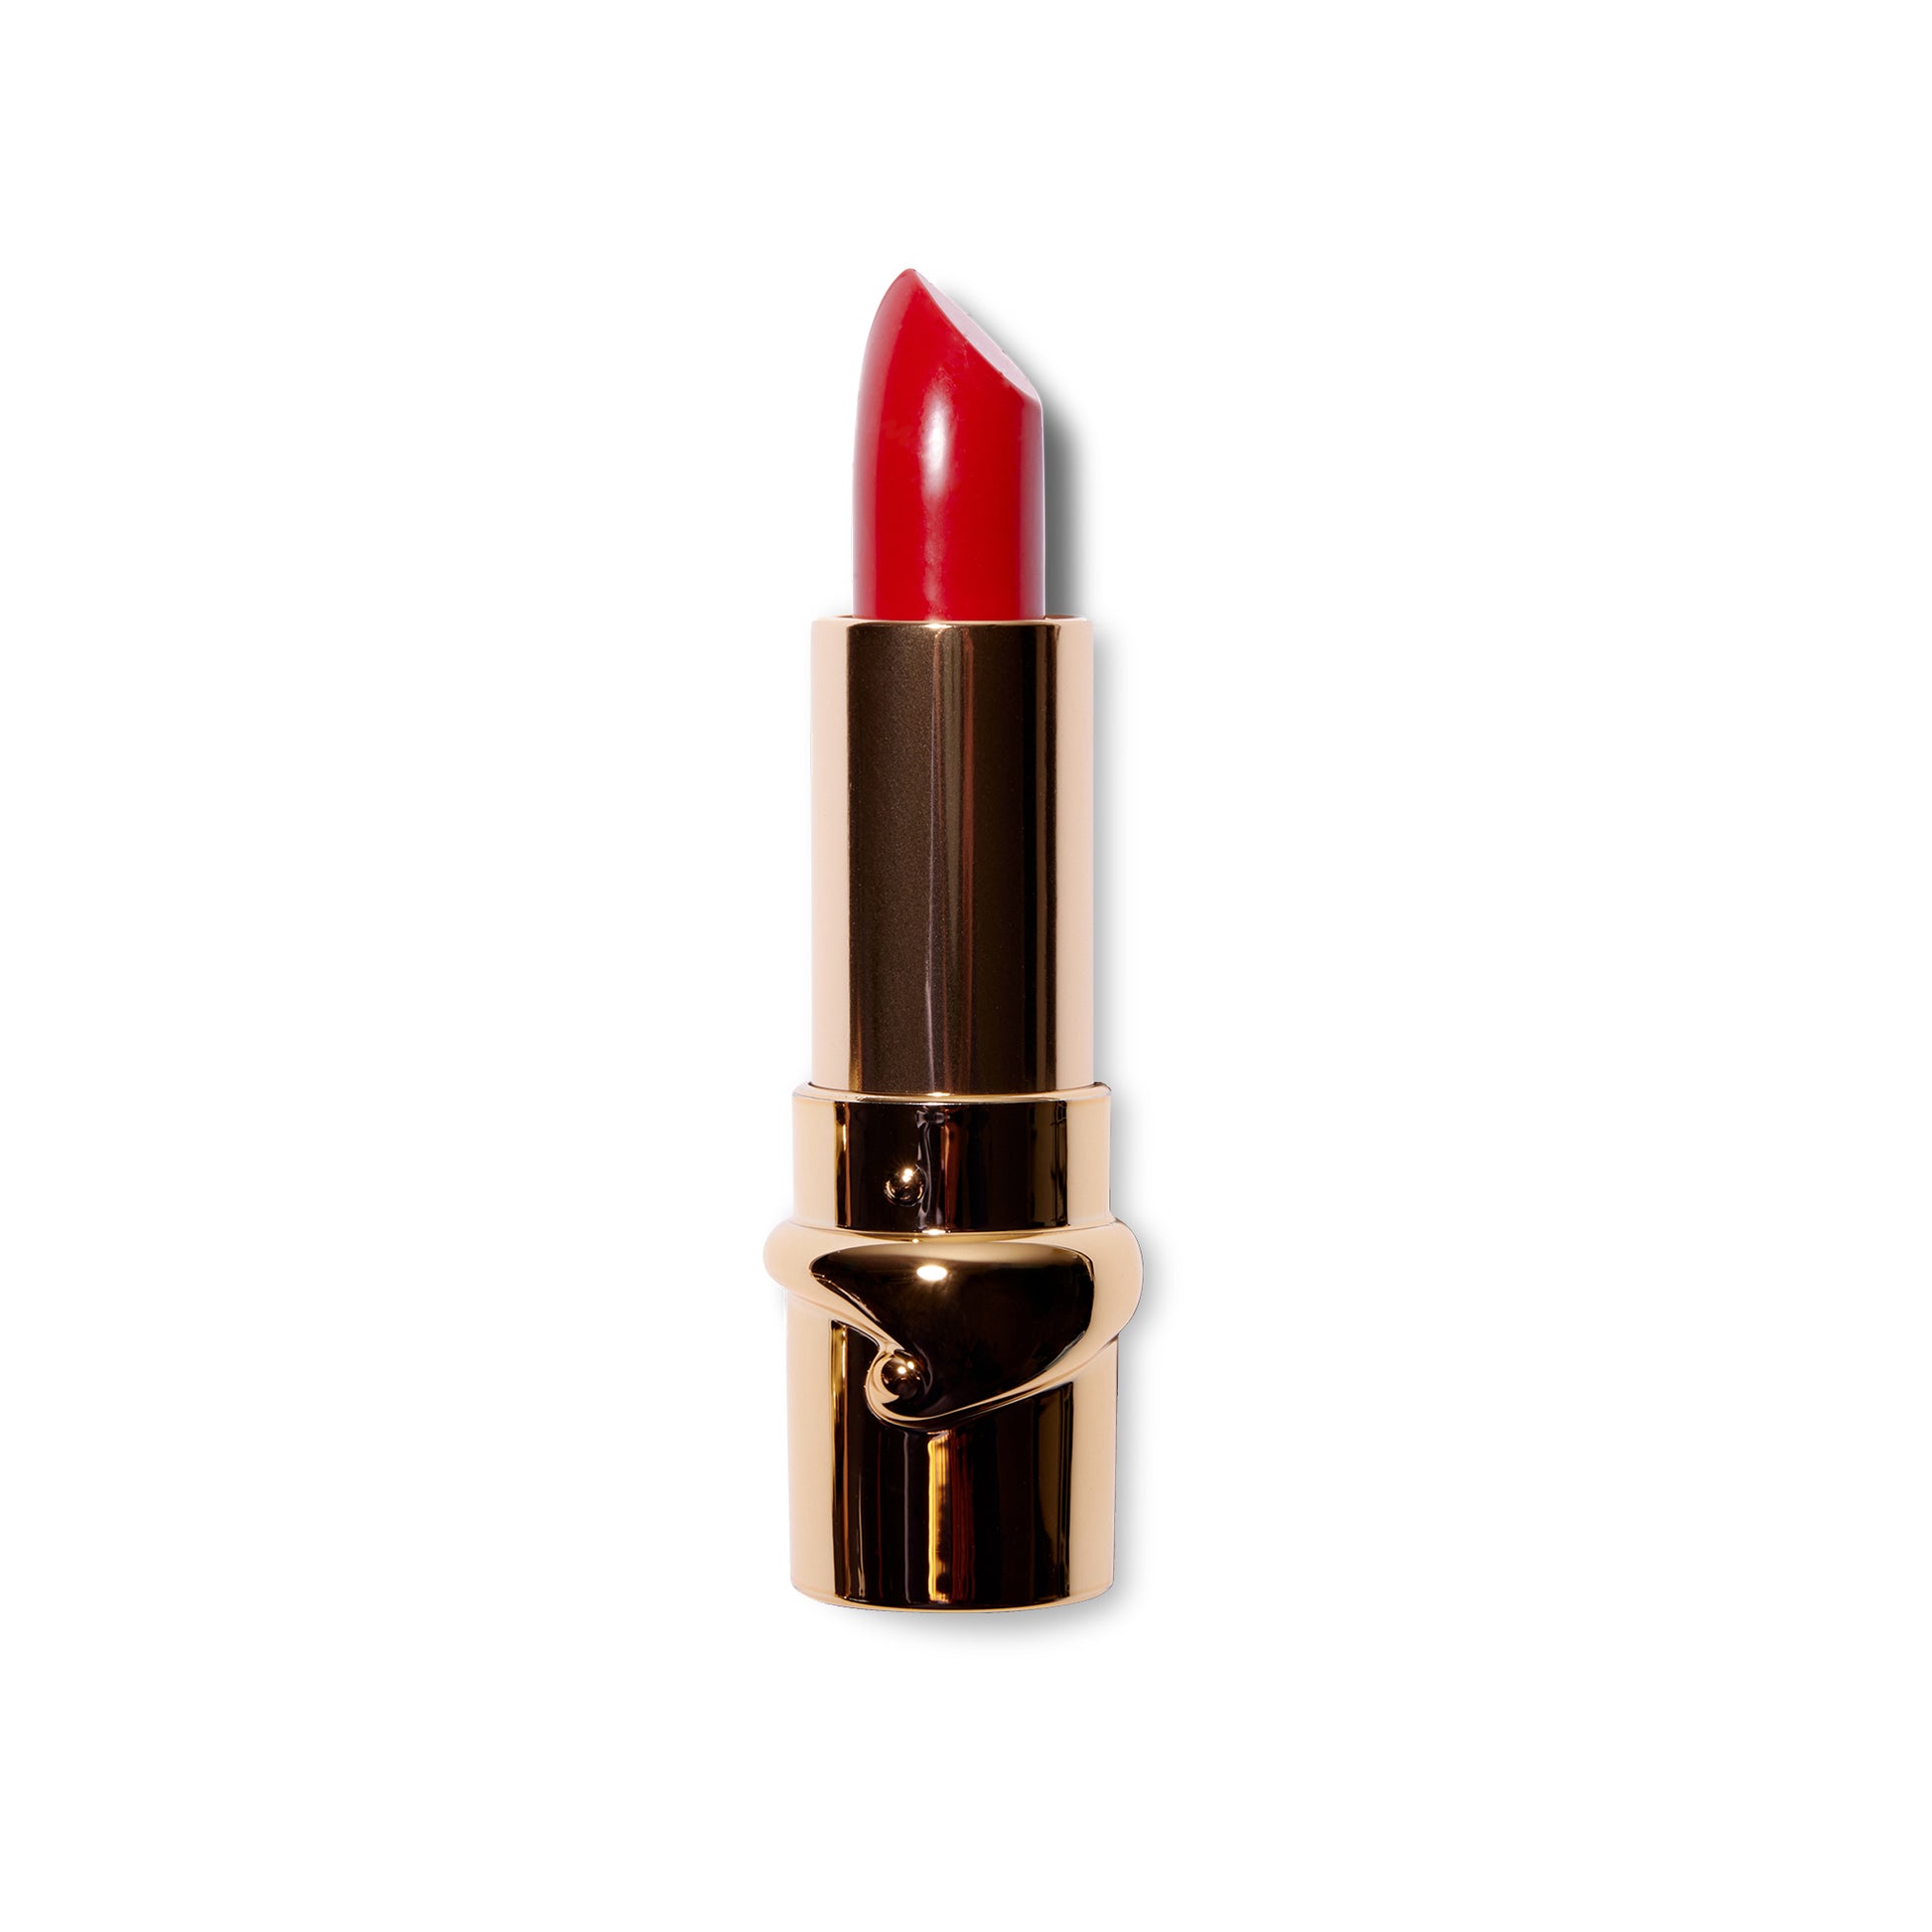 The Julie Hewlett matte Noir lipstick in Femme is wound up and the bullet is visible in the gold component. 